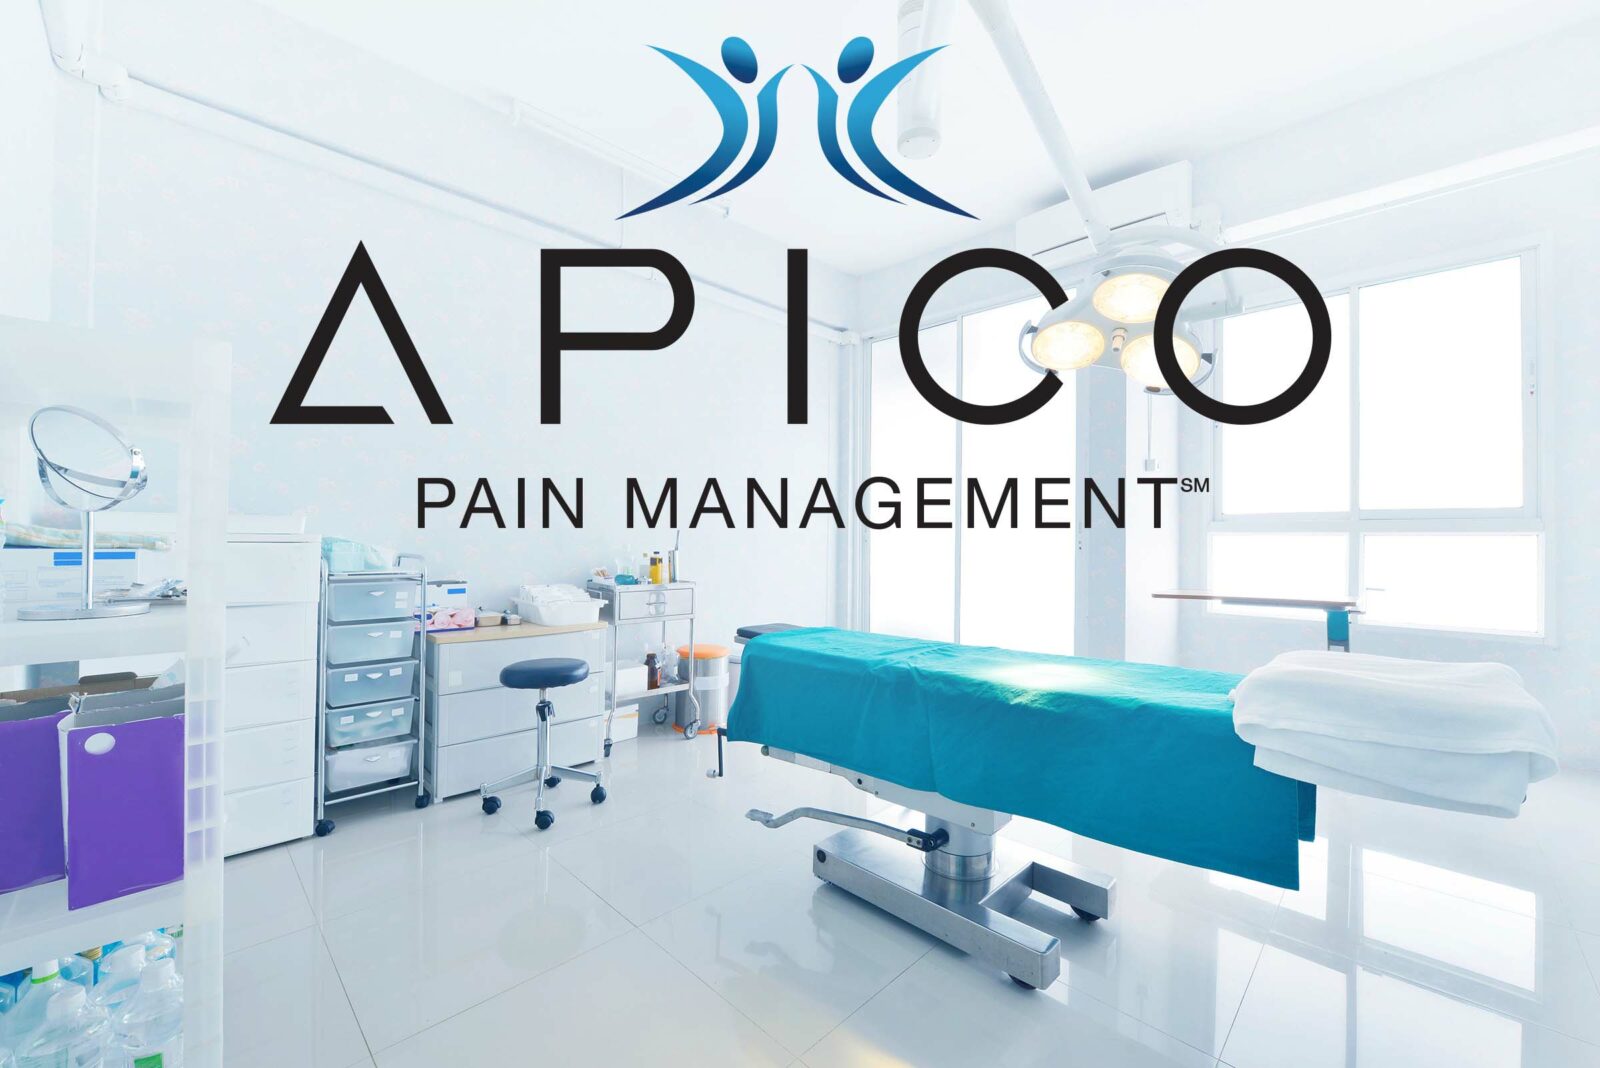 IMAGE OF SURGICAL ROOM WITH APICO LOGO OVERLAY